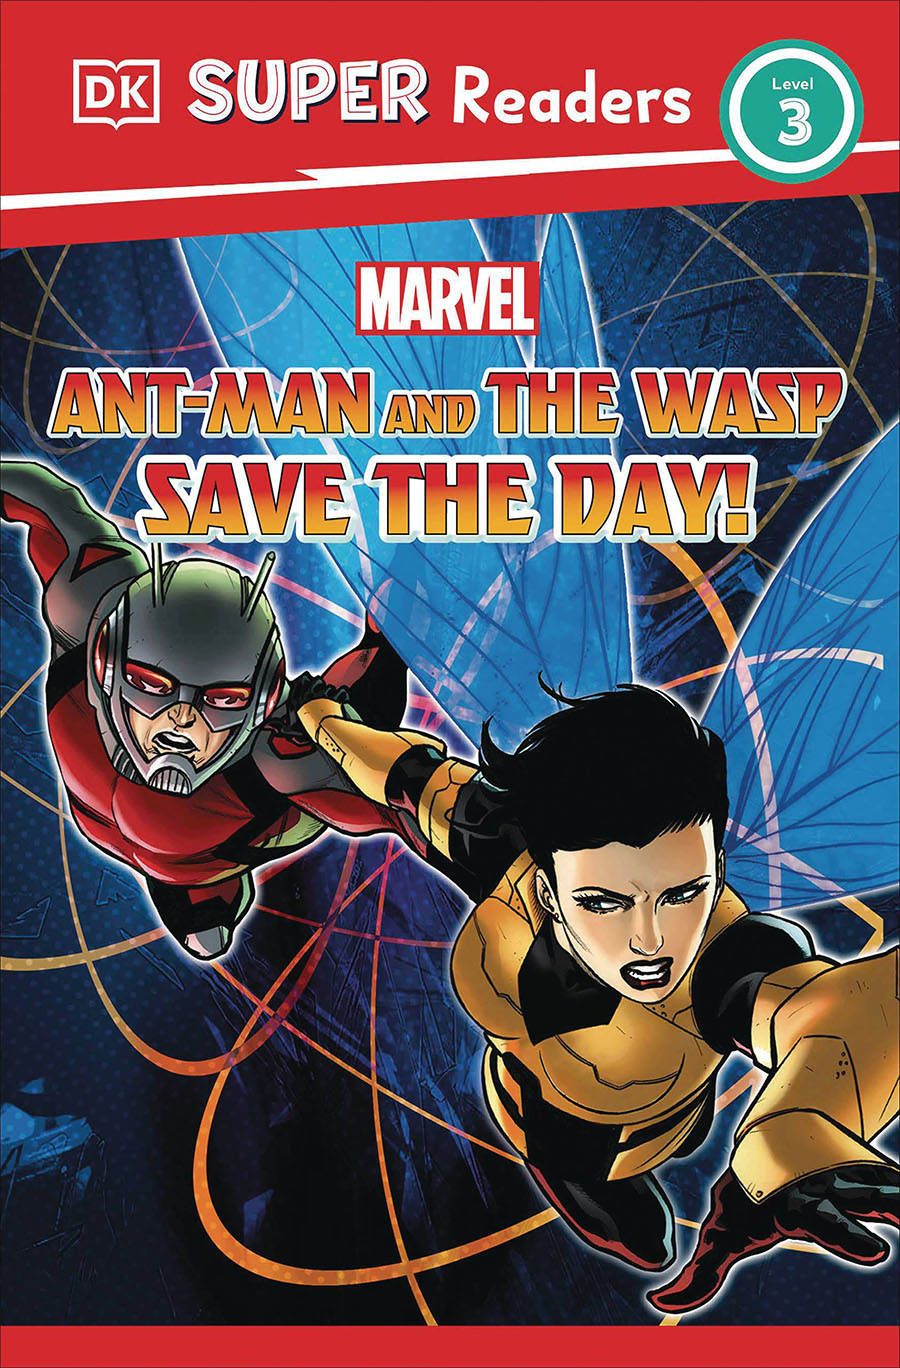 Marvel Ant-Man And The Wasp Save The Day Level 3 Reader